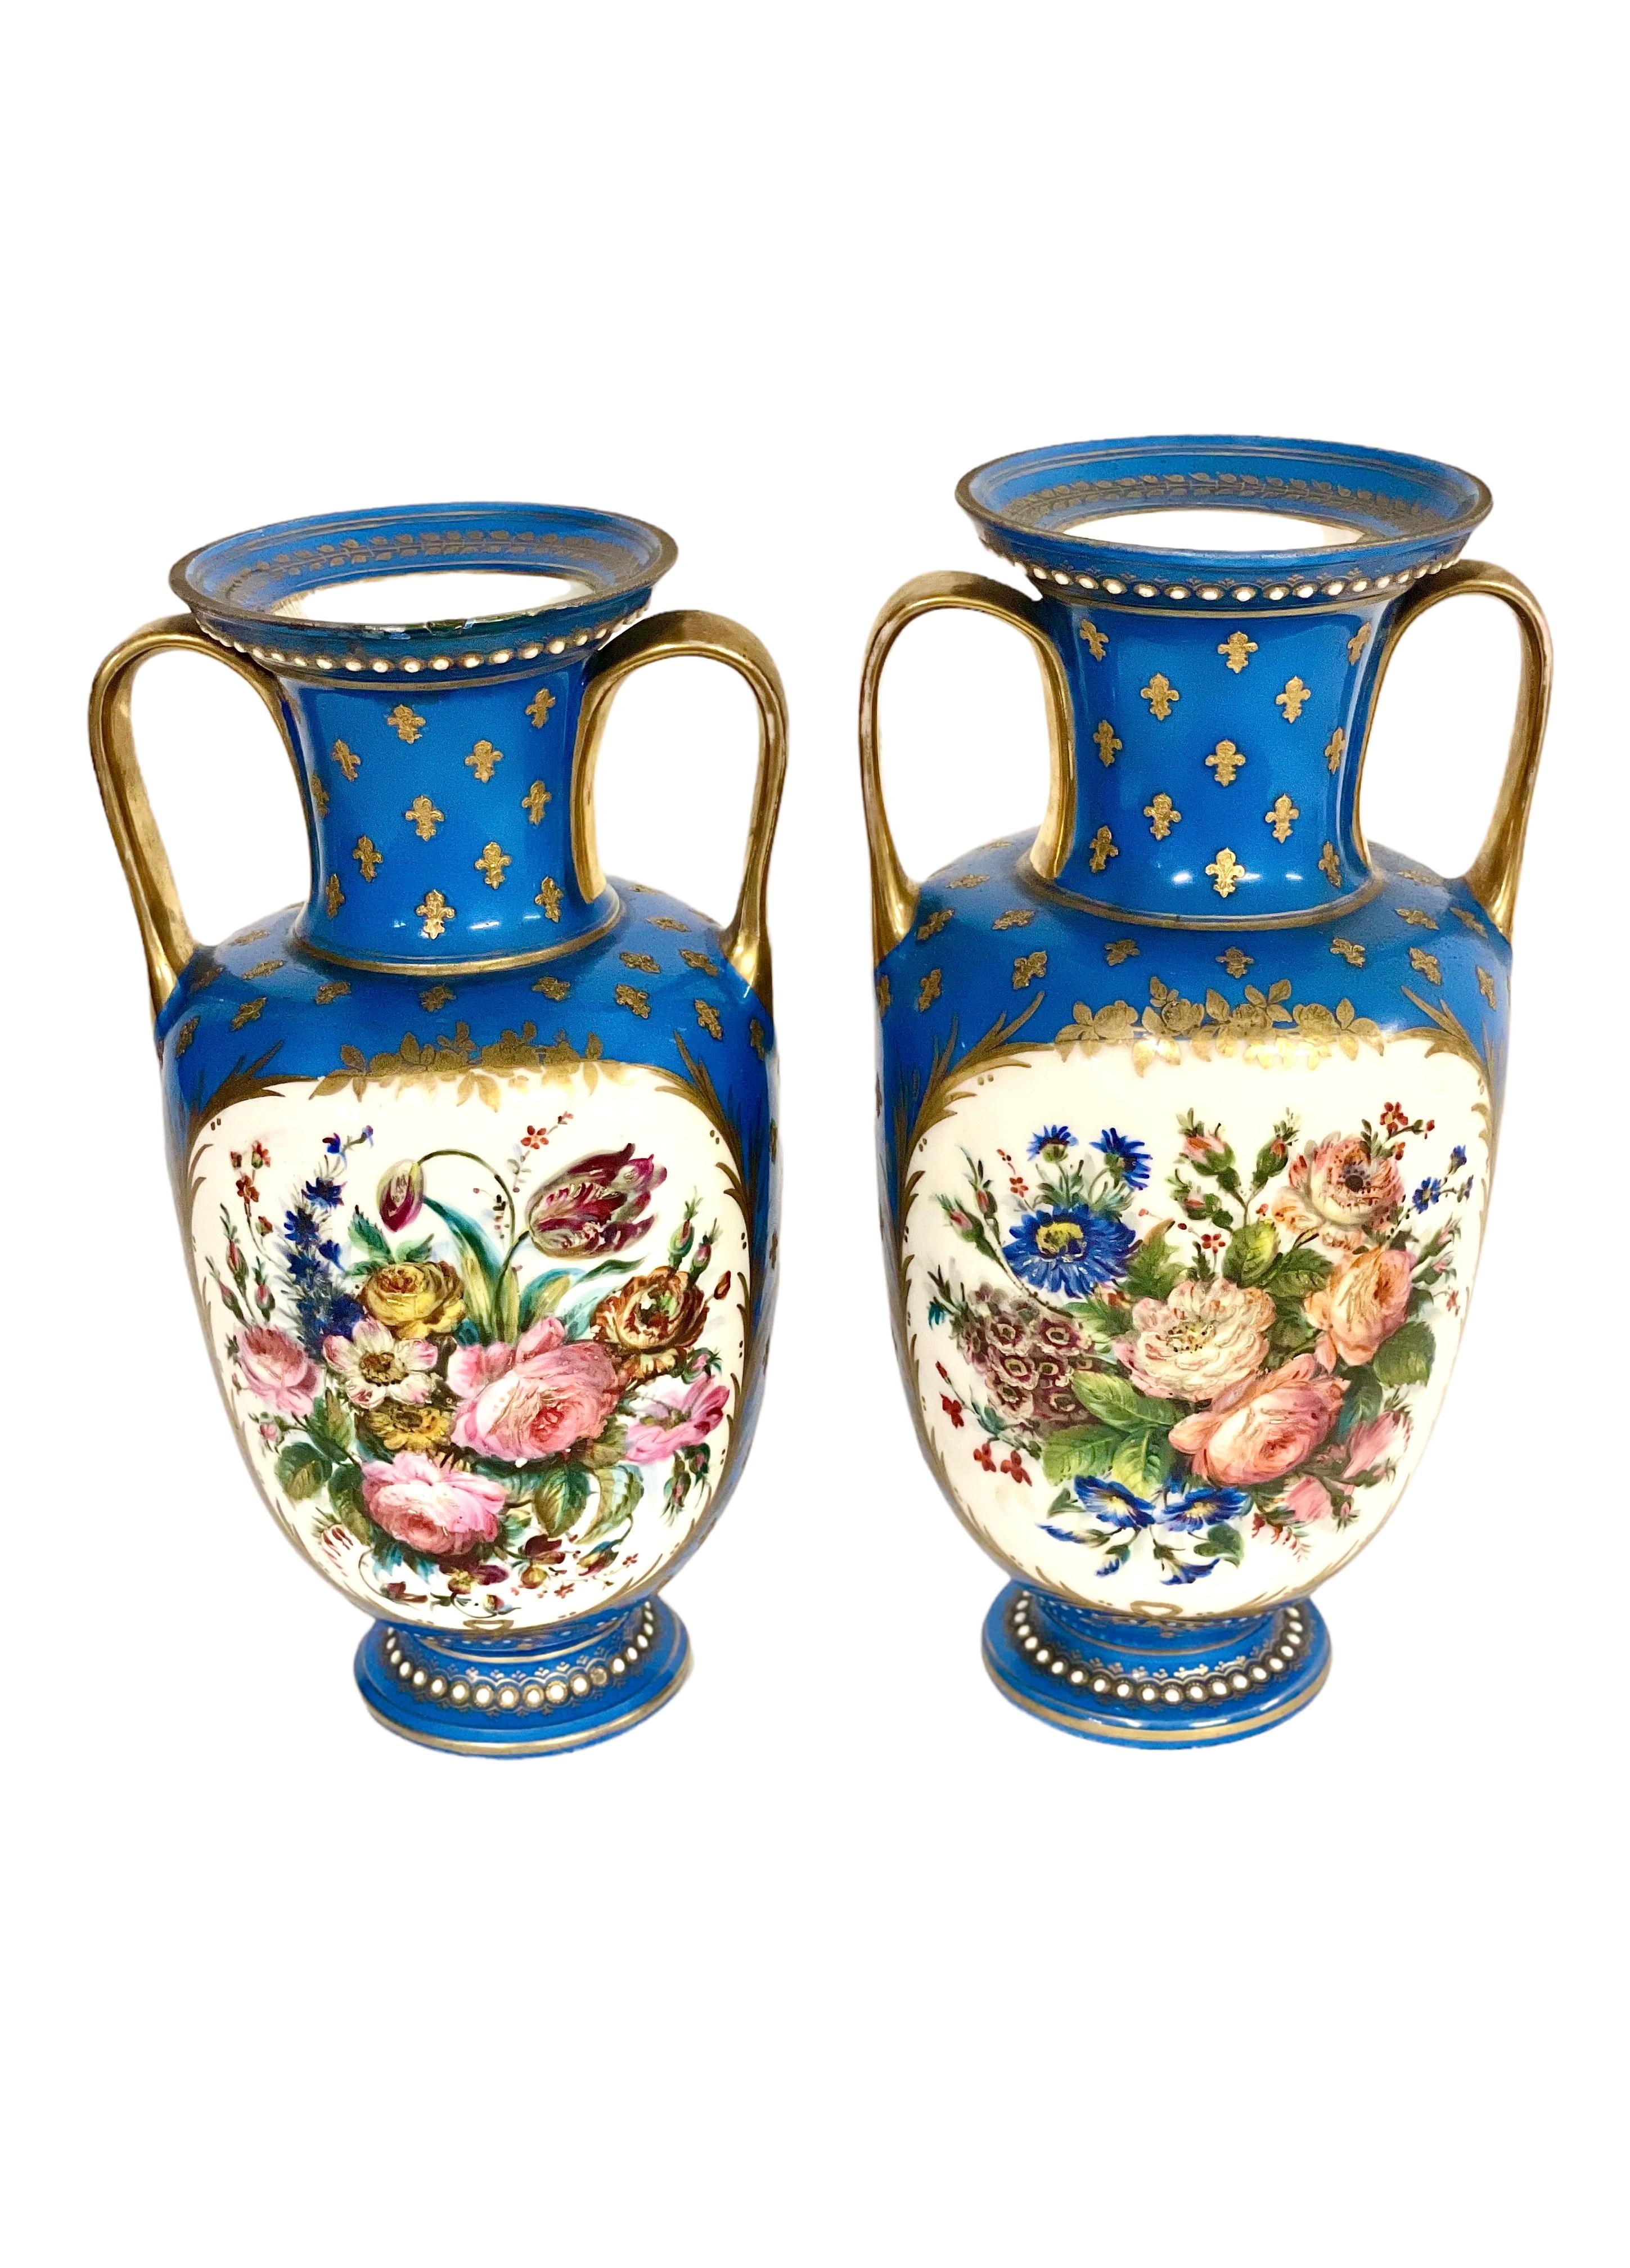 A beautiful pair of hand-painted Charles X Sèvres porcelain vases, painted in classical blue, with fleur-de-lis on the neck, gilded handles and pearl decoration. The front scenes depict frolicking cupids on a background of flowers within a gilded